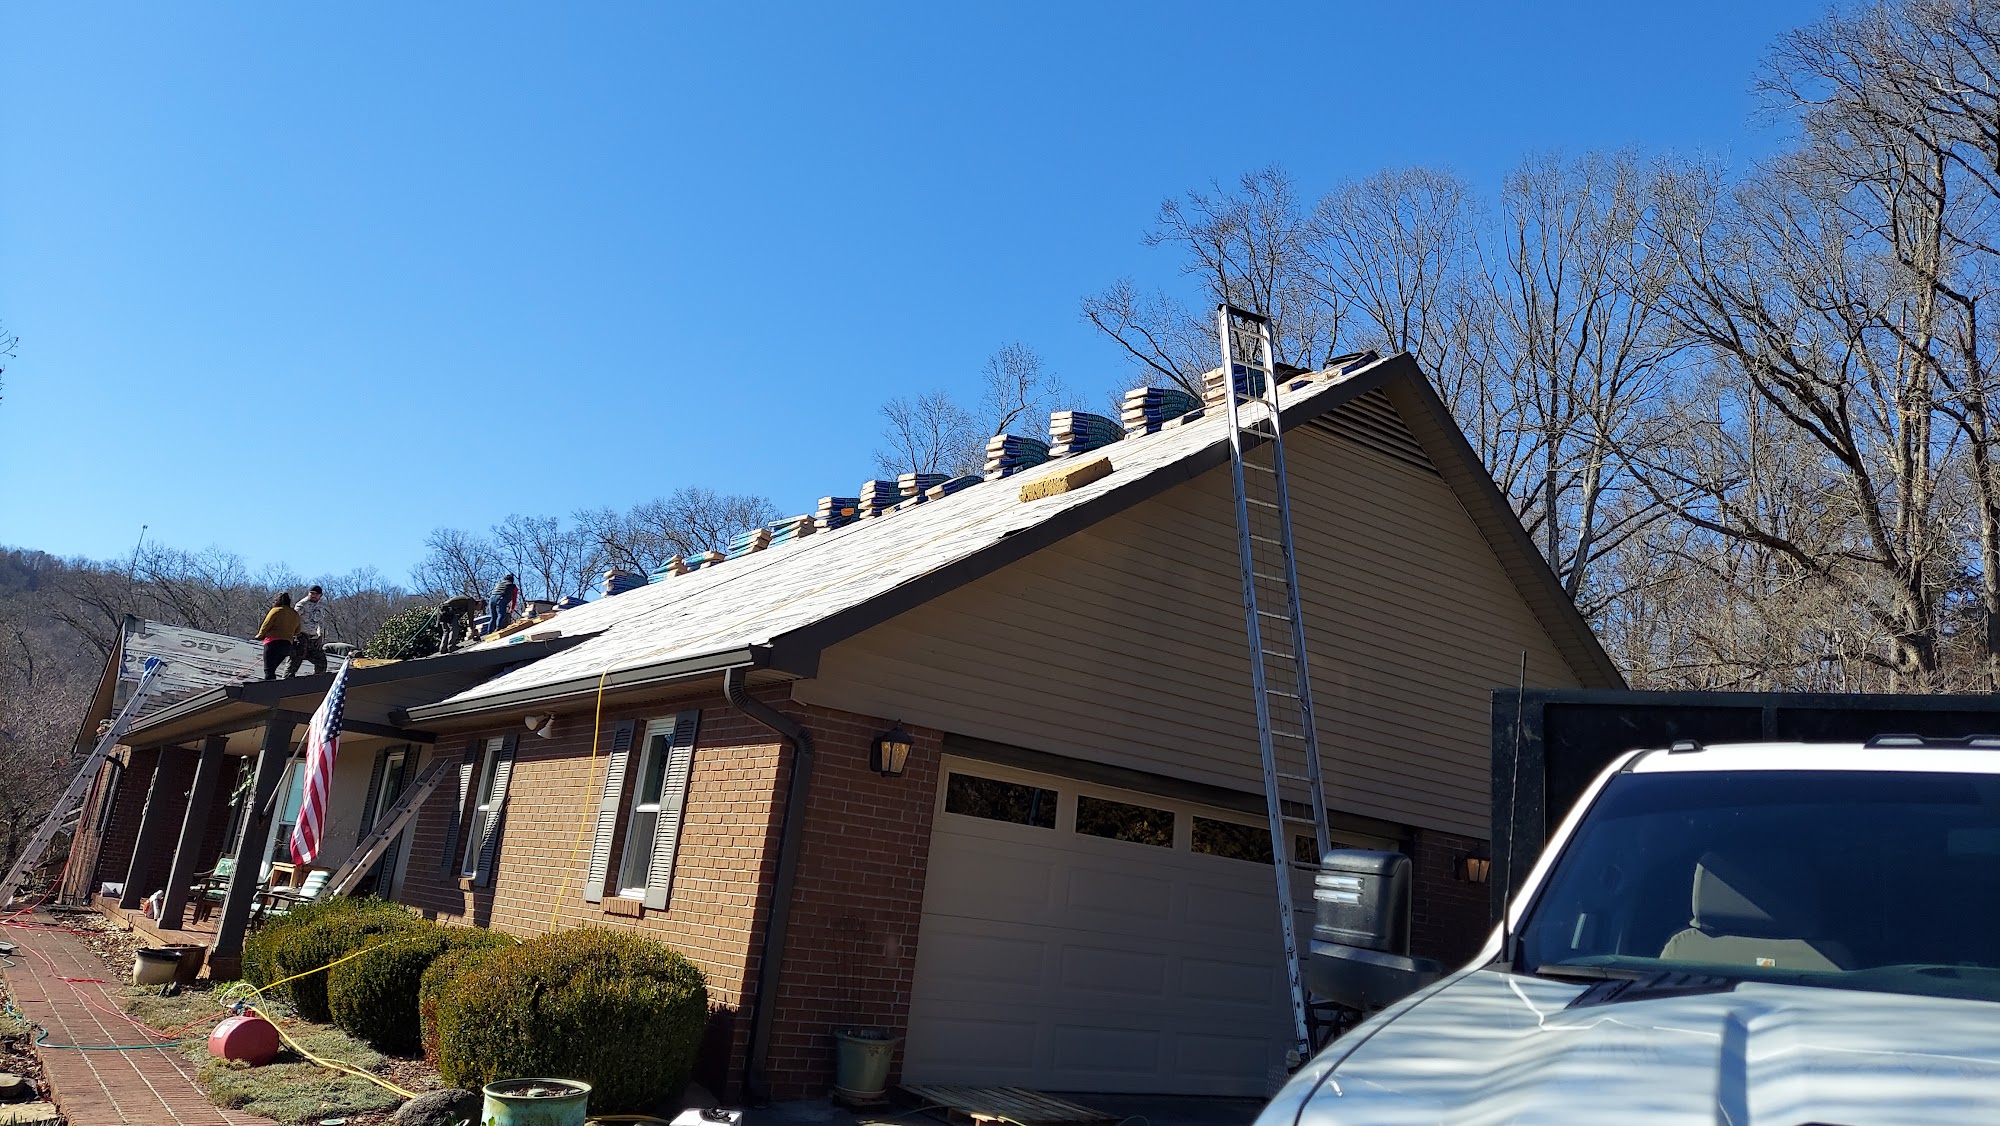 Martin's Roofing Service 481 Meadowview Ln, Bean Station Tennessee 37708